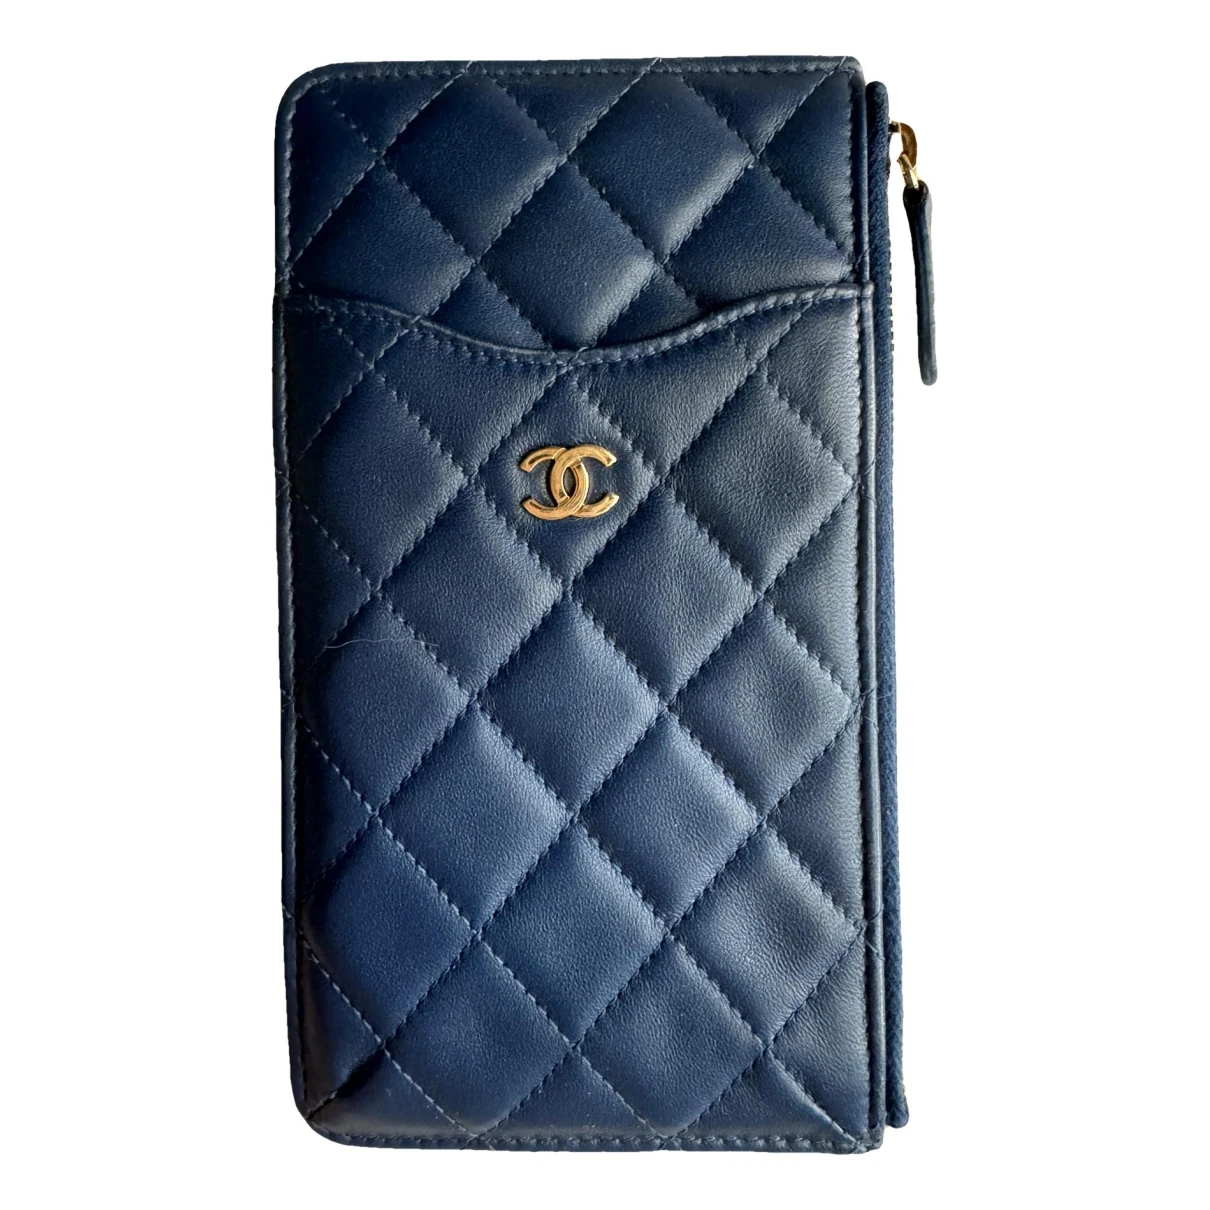 Pre-owned Chanel Timeless/classique Leather Wallet In Navy